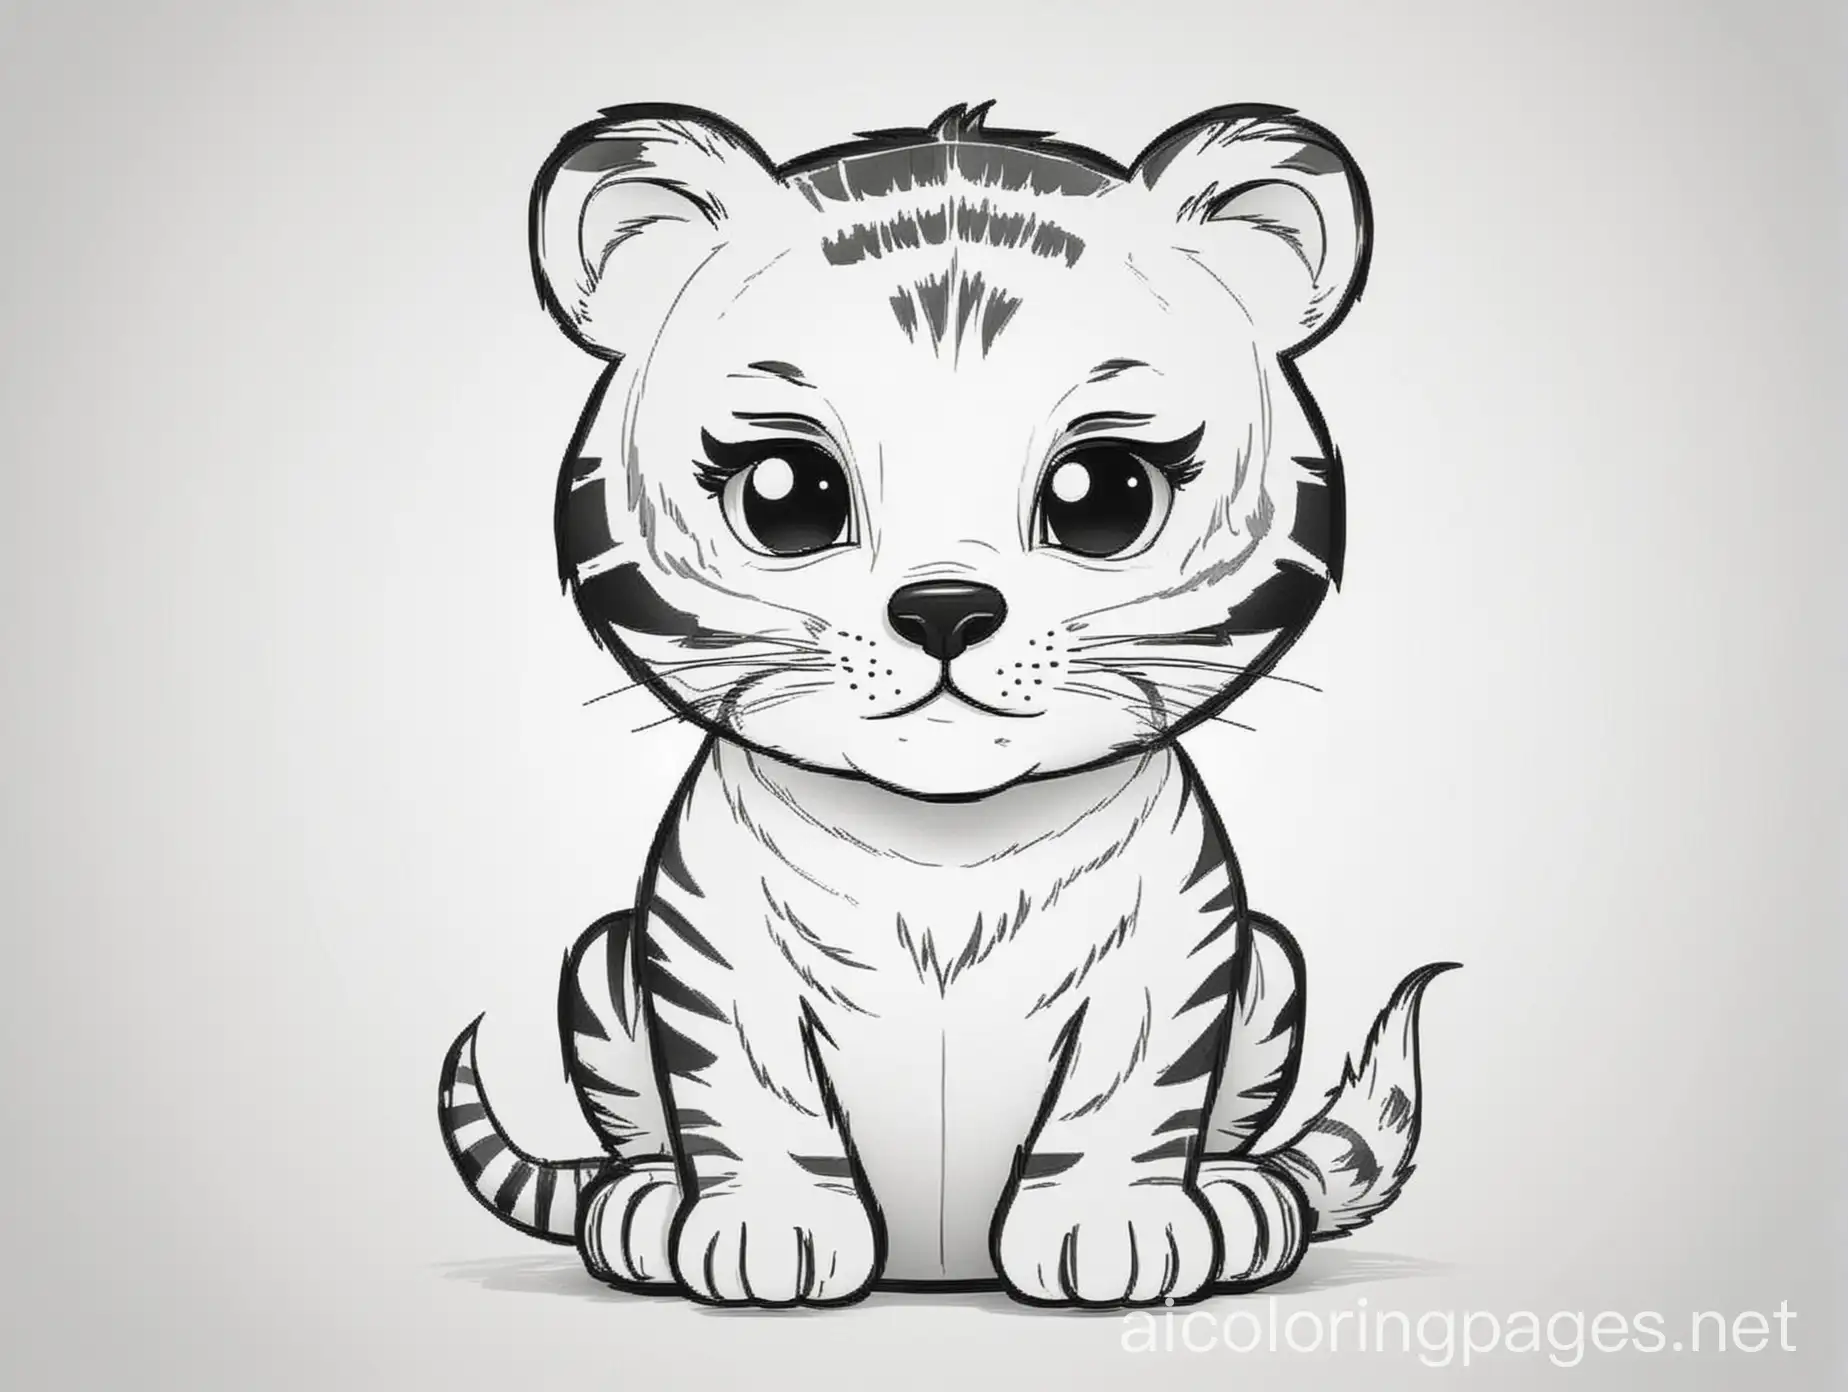 Adorable-Tiger-Coloring-Page-Simple-Black-and-White-Line-Art-for-Kids